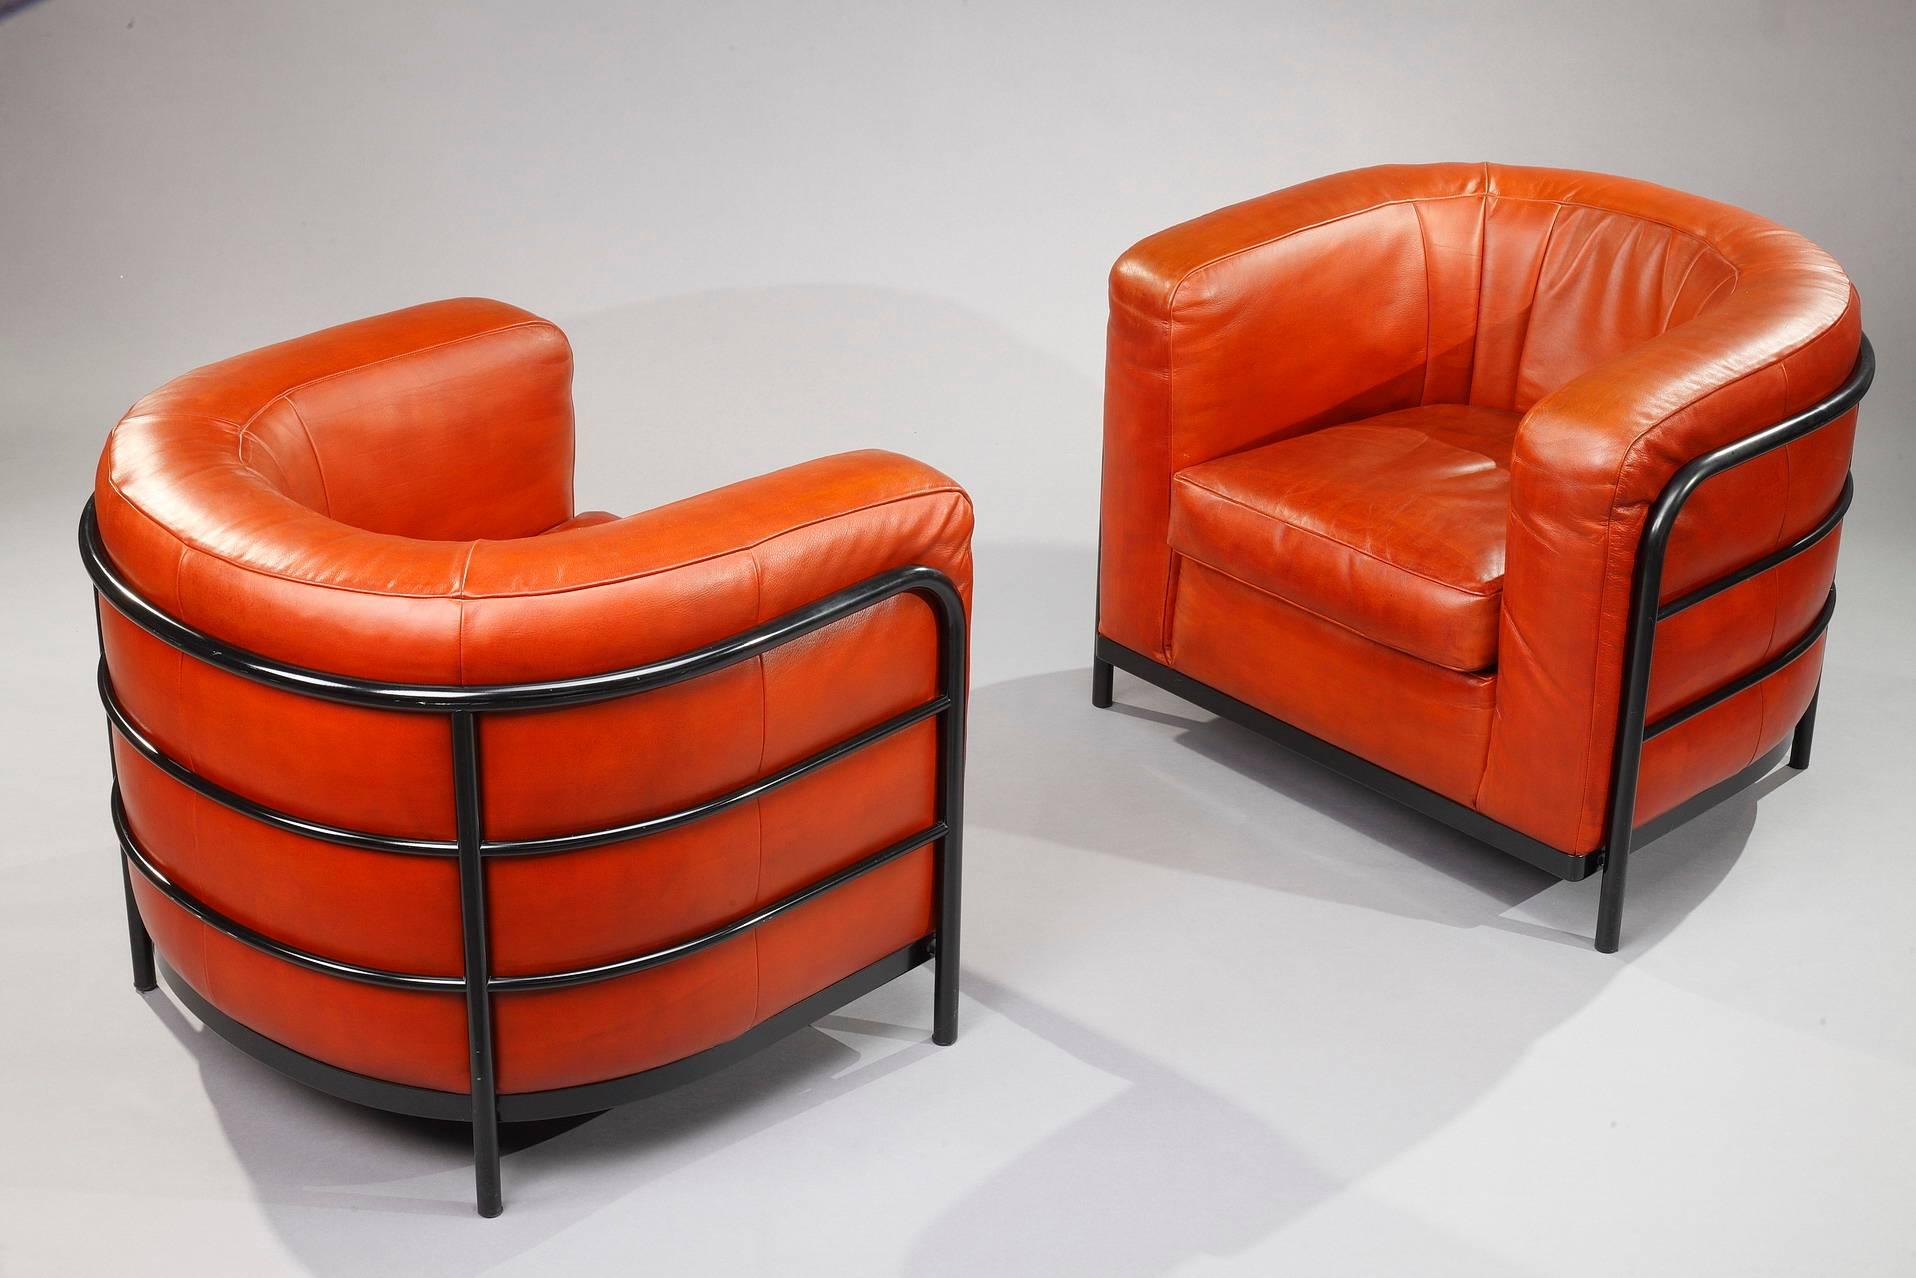 Pair of Onda armchairs in orange leather designed by Paolo Lomazzi, Jonathan de Pas and Donato D’Urbino in 1985 for Zanotta. Black lacquered metal structure and feet. Each item is labelled Zanotta Italy and numbered,

circa 1980
Dimension: W 34.6